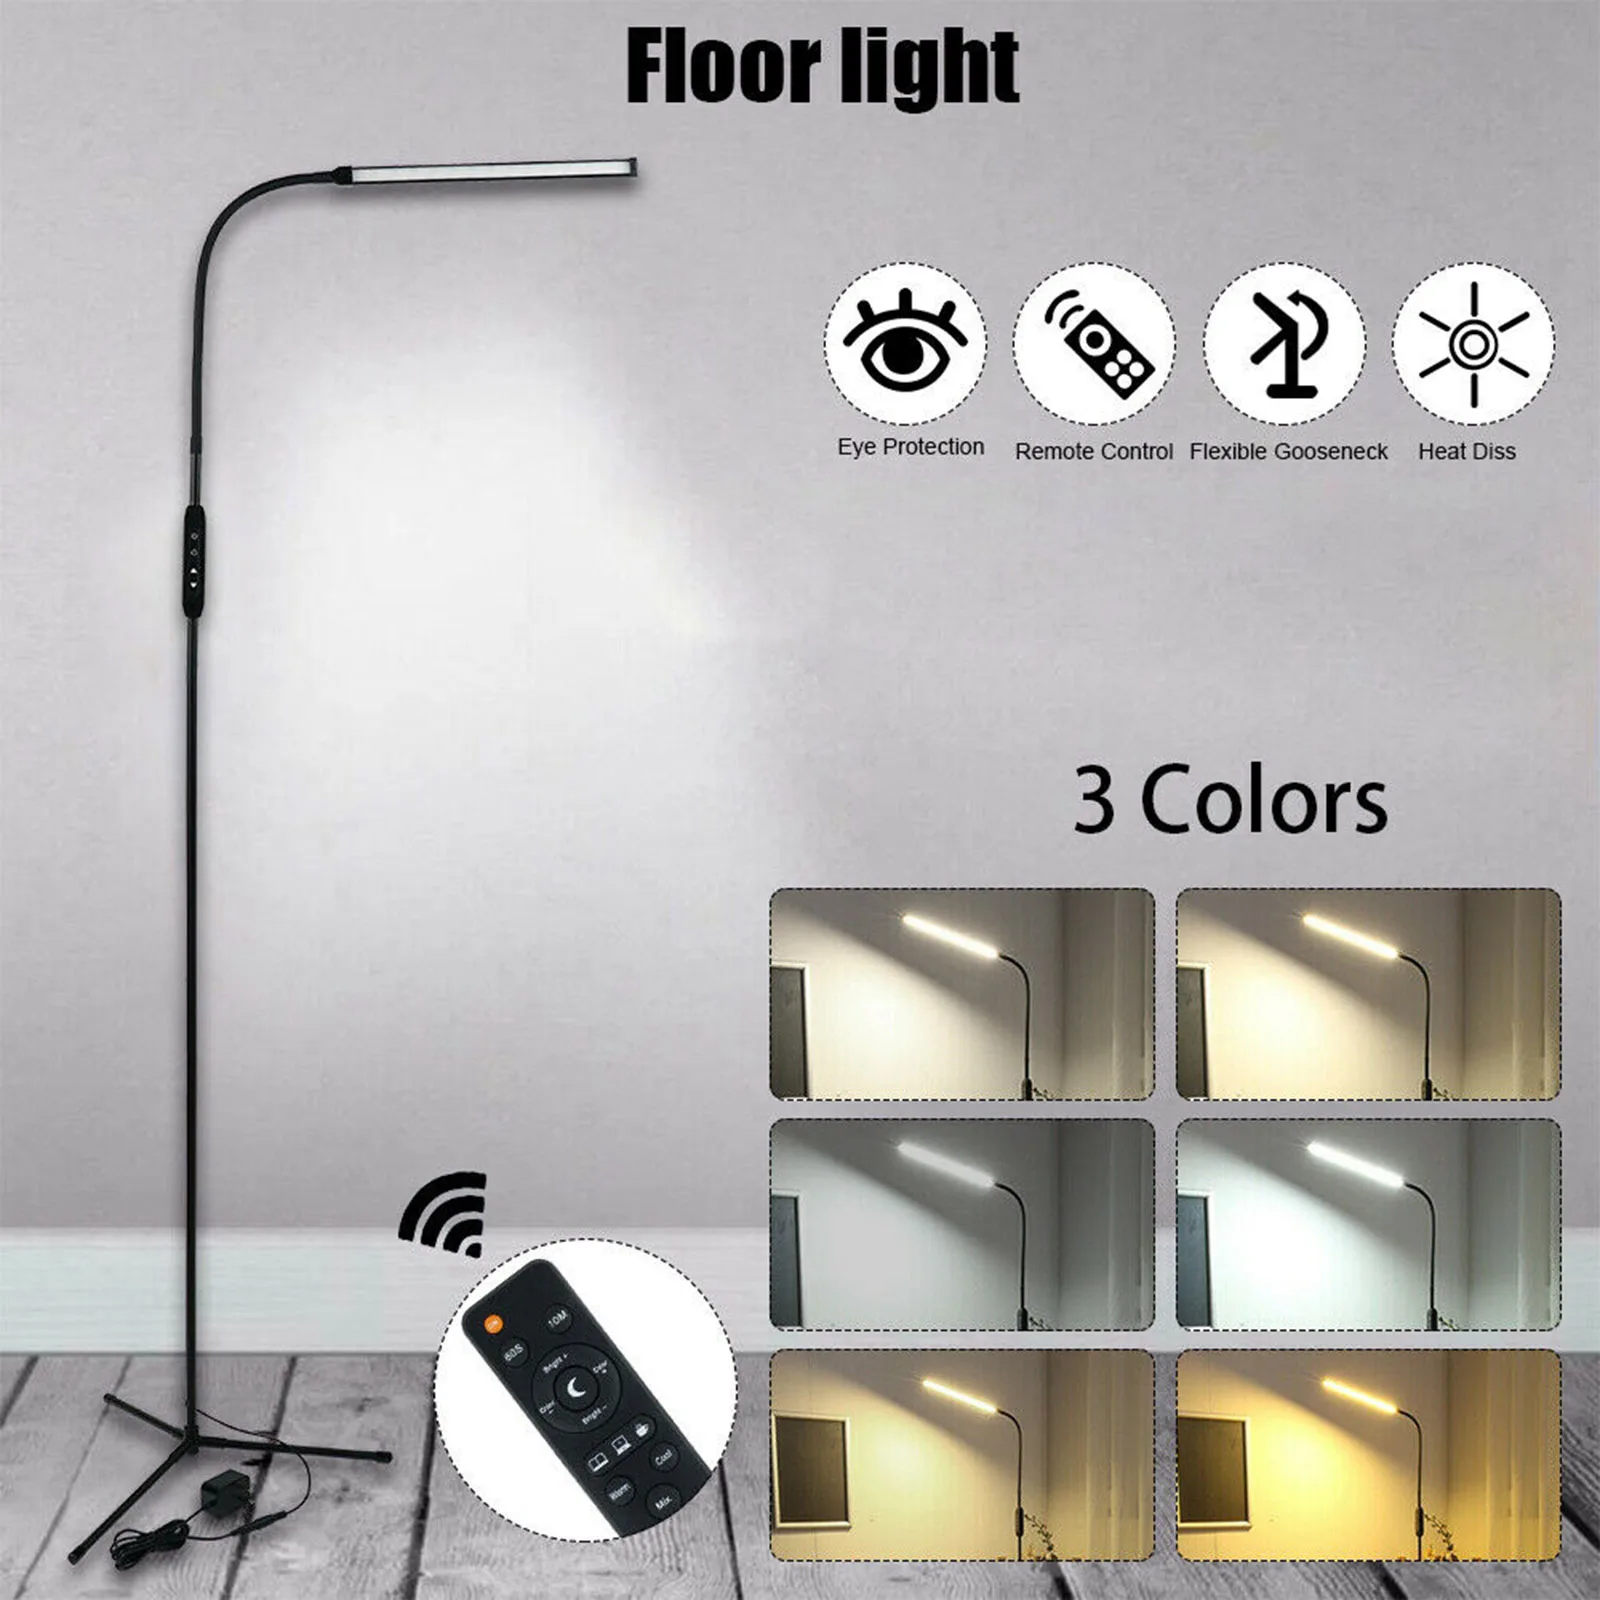 Floor-Lamp Smart Control with Remote Controller Bright Floor Lamps for Living Room Bedroom Office Kids Room